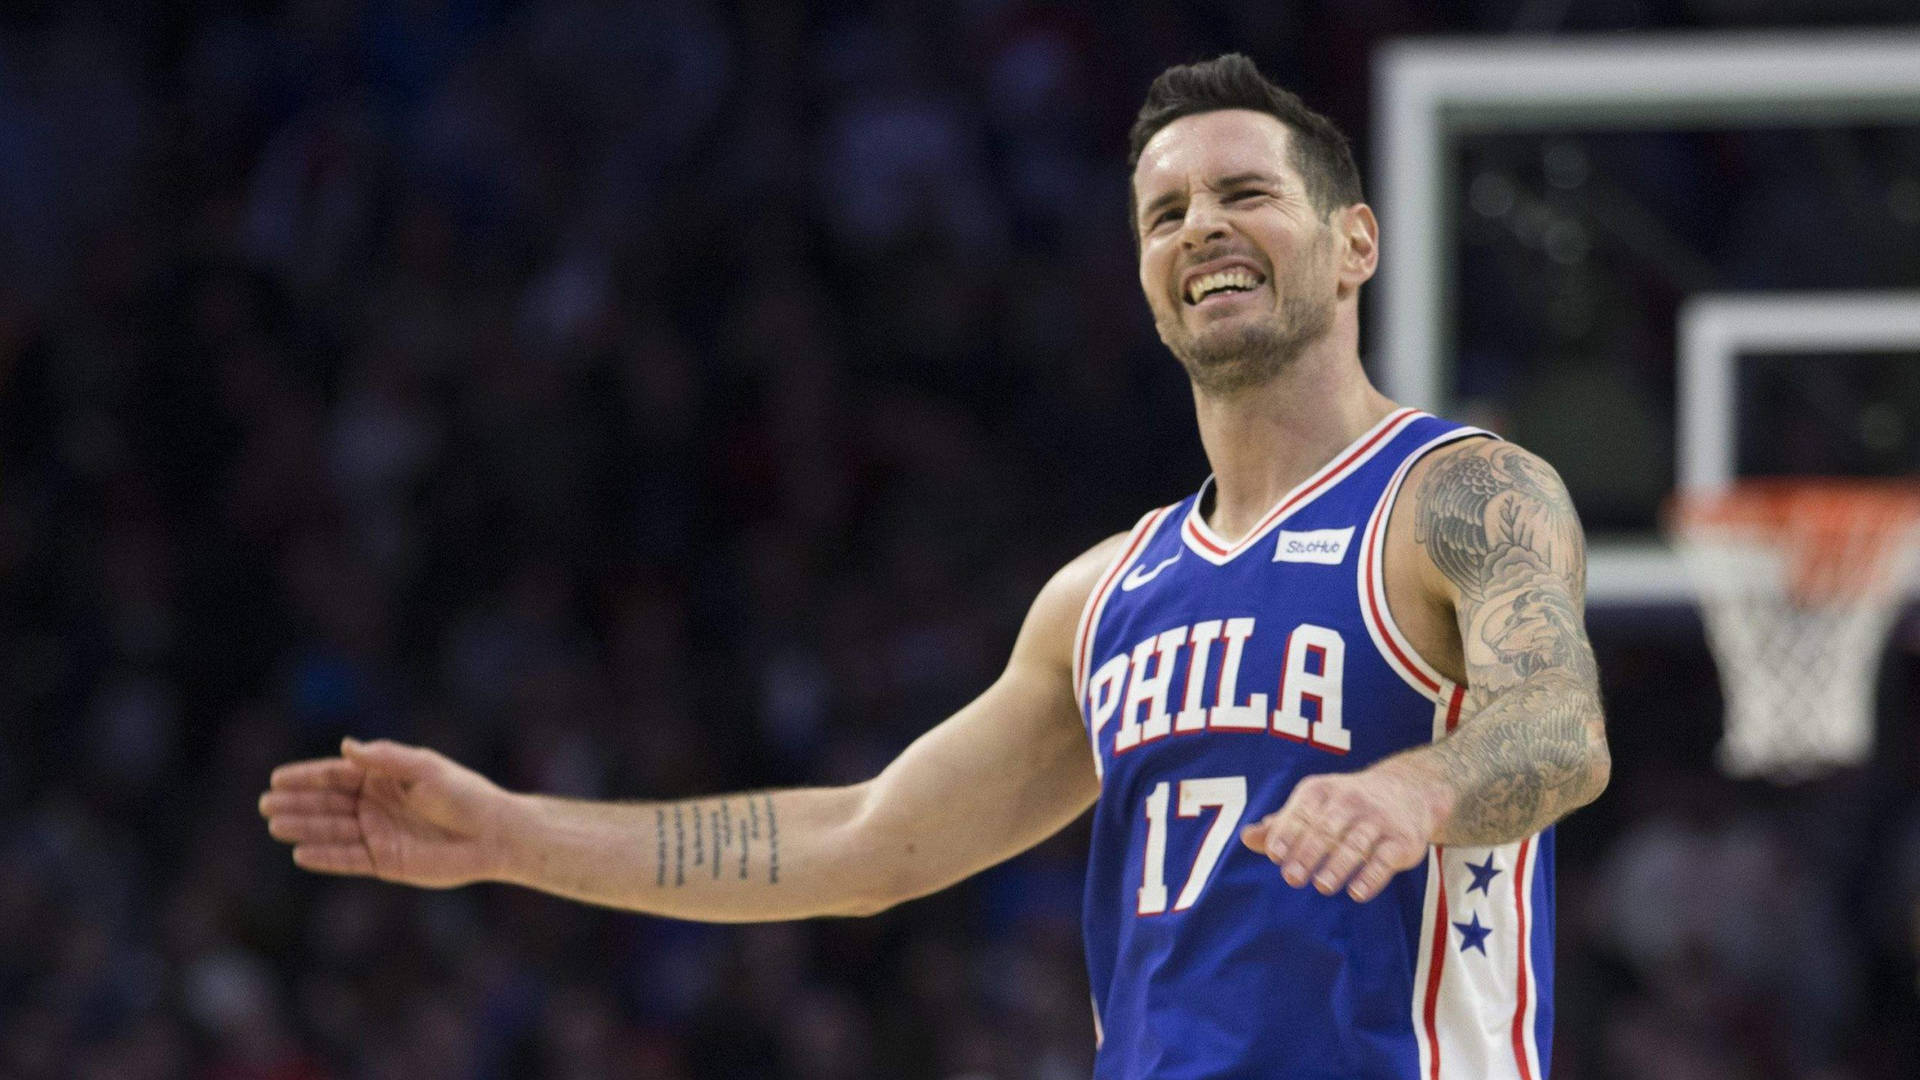 Jj Redick With A Cheerful Look Background